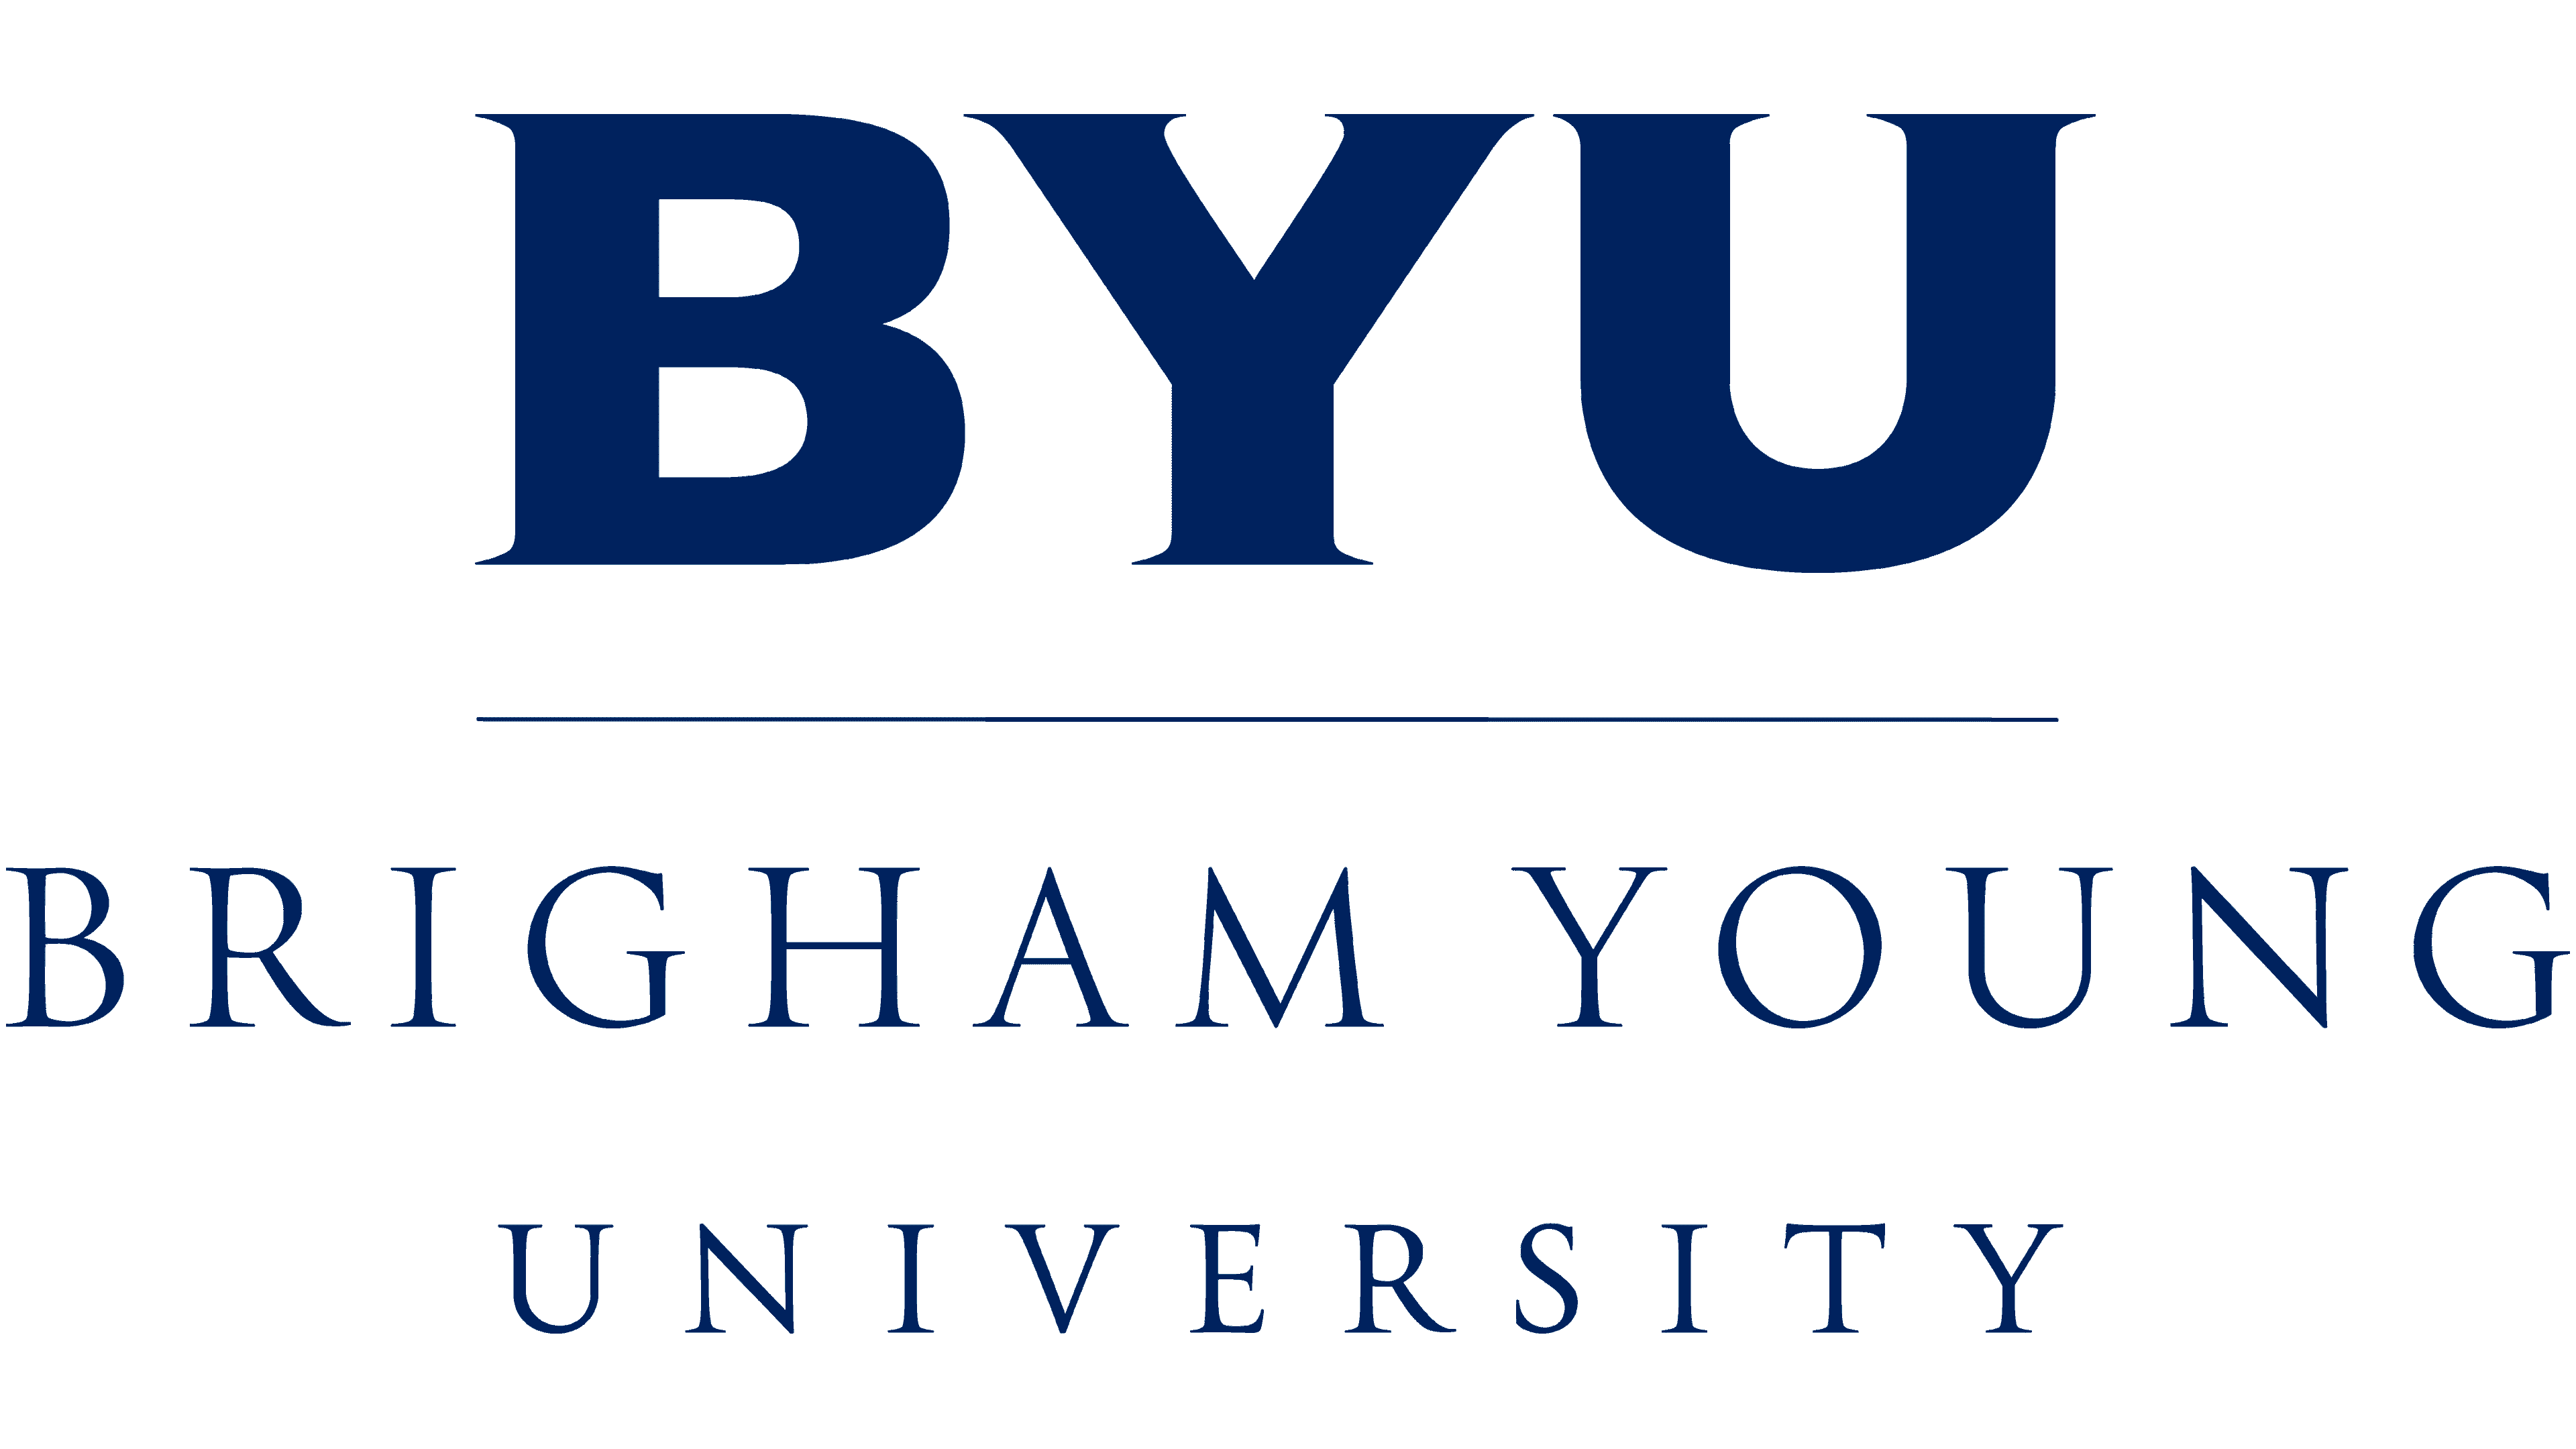 Brigham Young University Logo, PNG, Symbol, History, Meaning